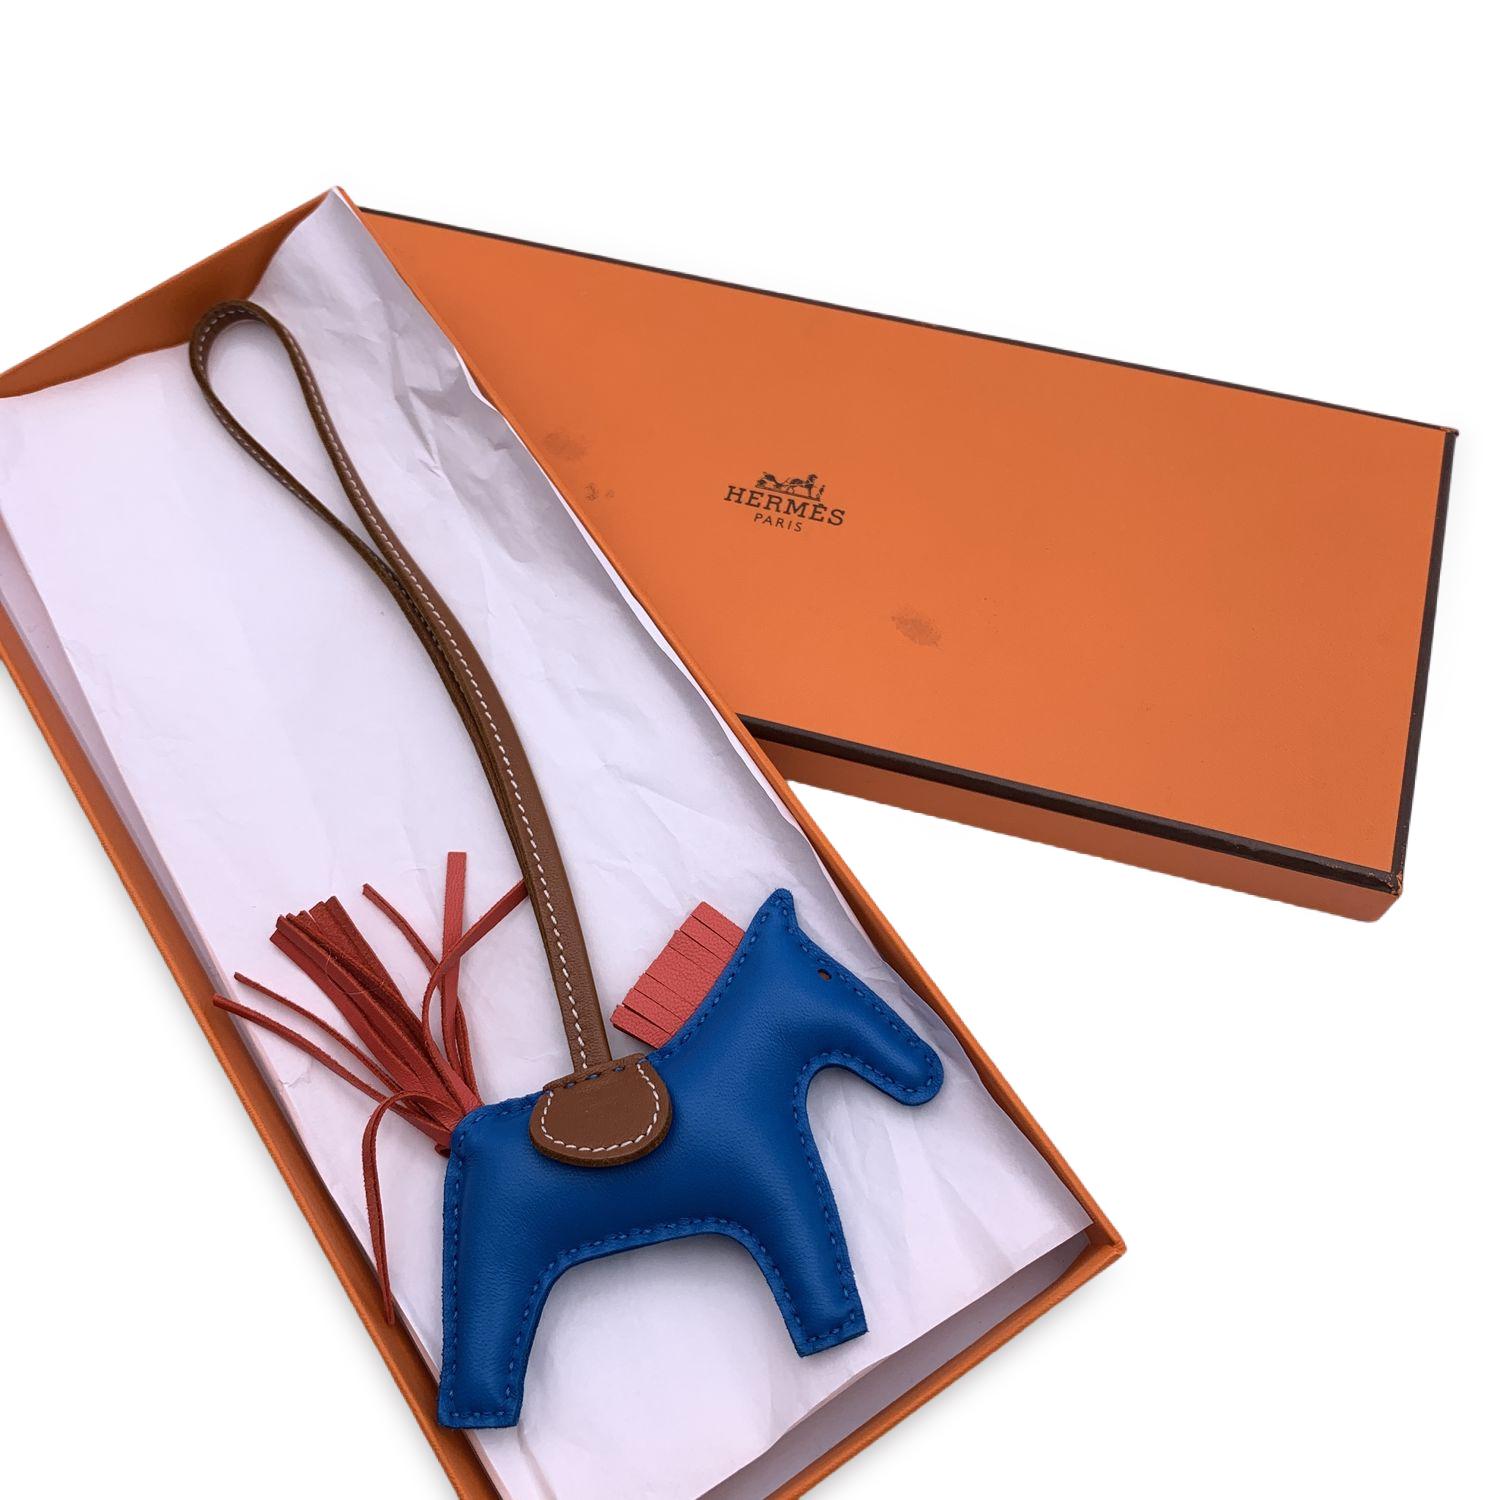 Hermes Rodeo PM Bag Charm Accessory in the shape of a horse. Body in blue leather, hair and tail in salmon red/pink color and saddle and loop in light brown color. Width: 3.5 inches - 9 cm. Height: 3 inches - 7.5 cm. 'Hermes Paris - Made in France'